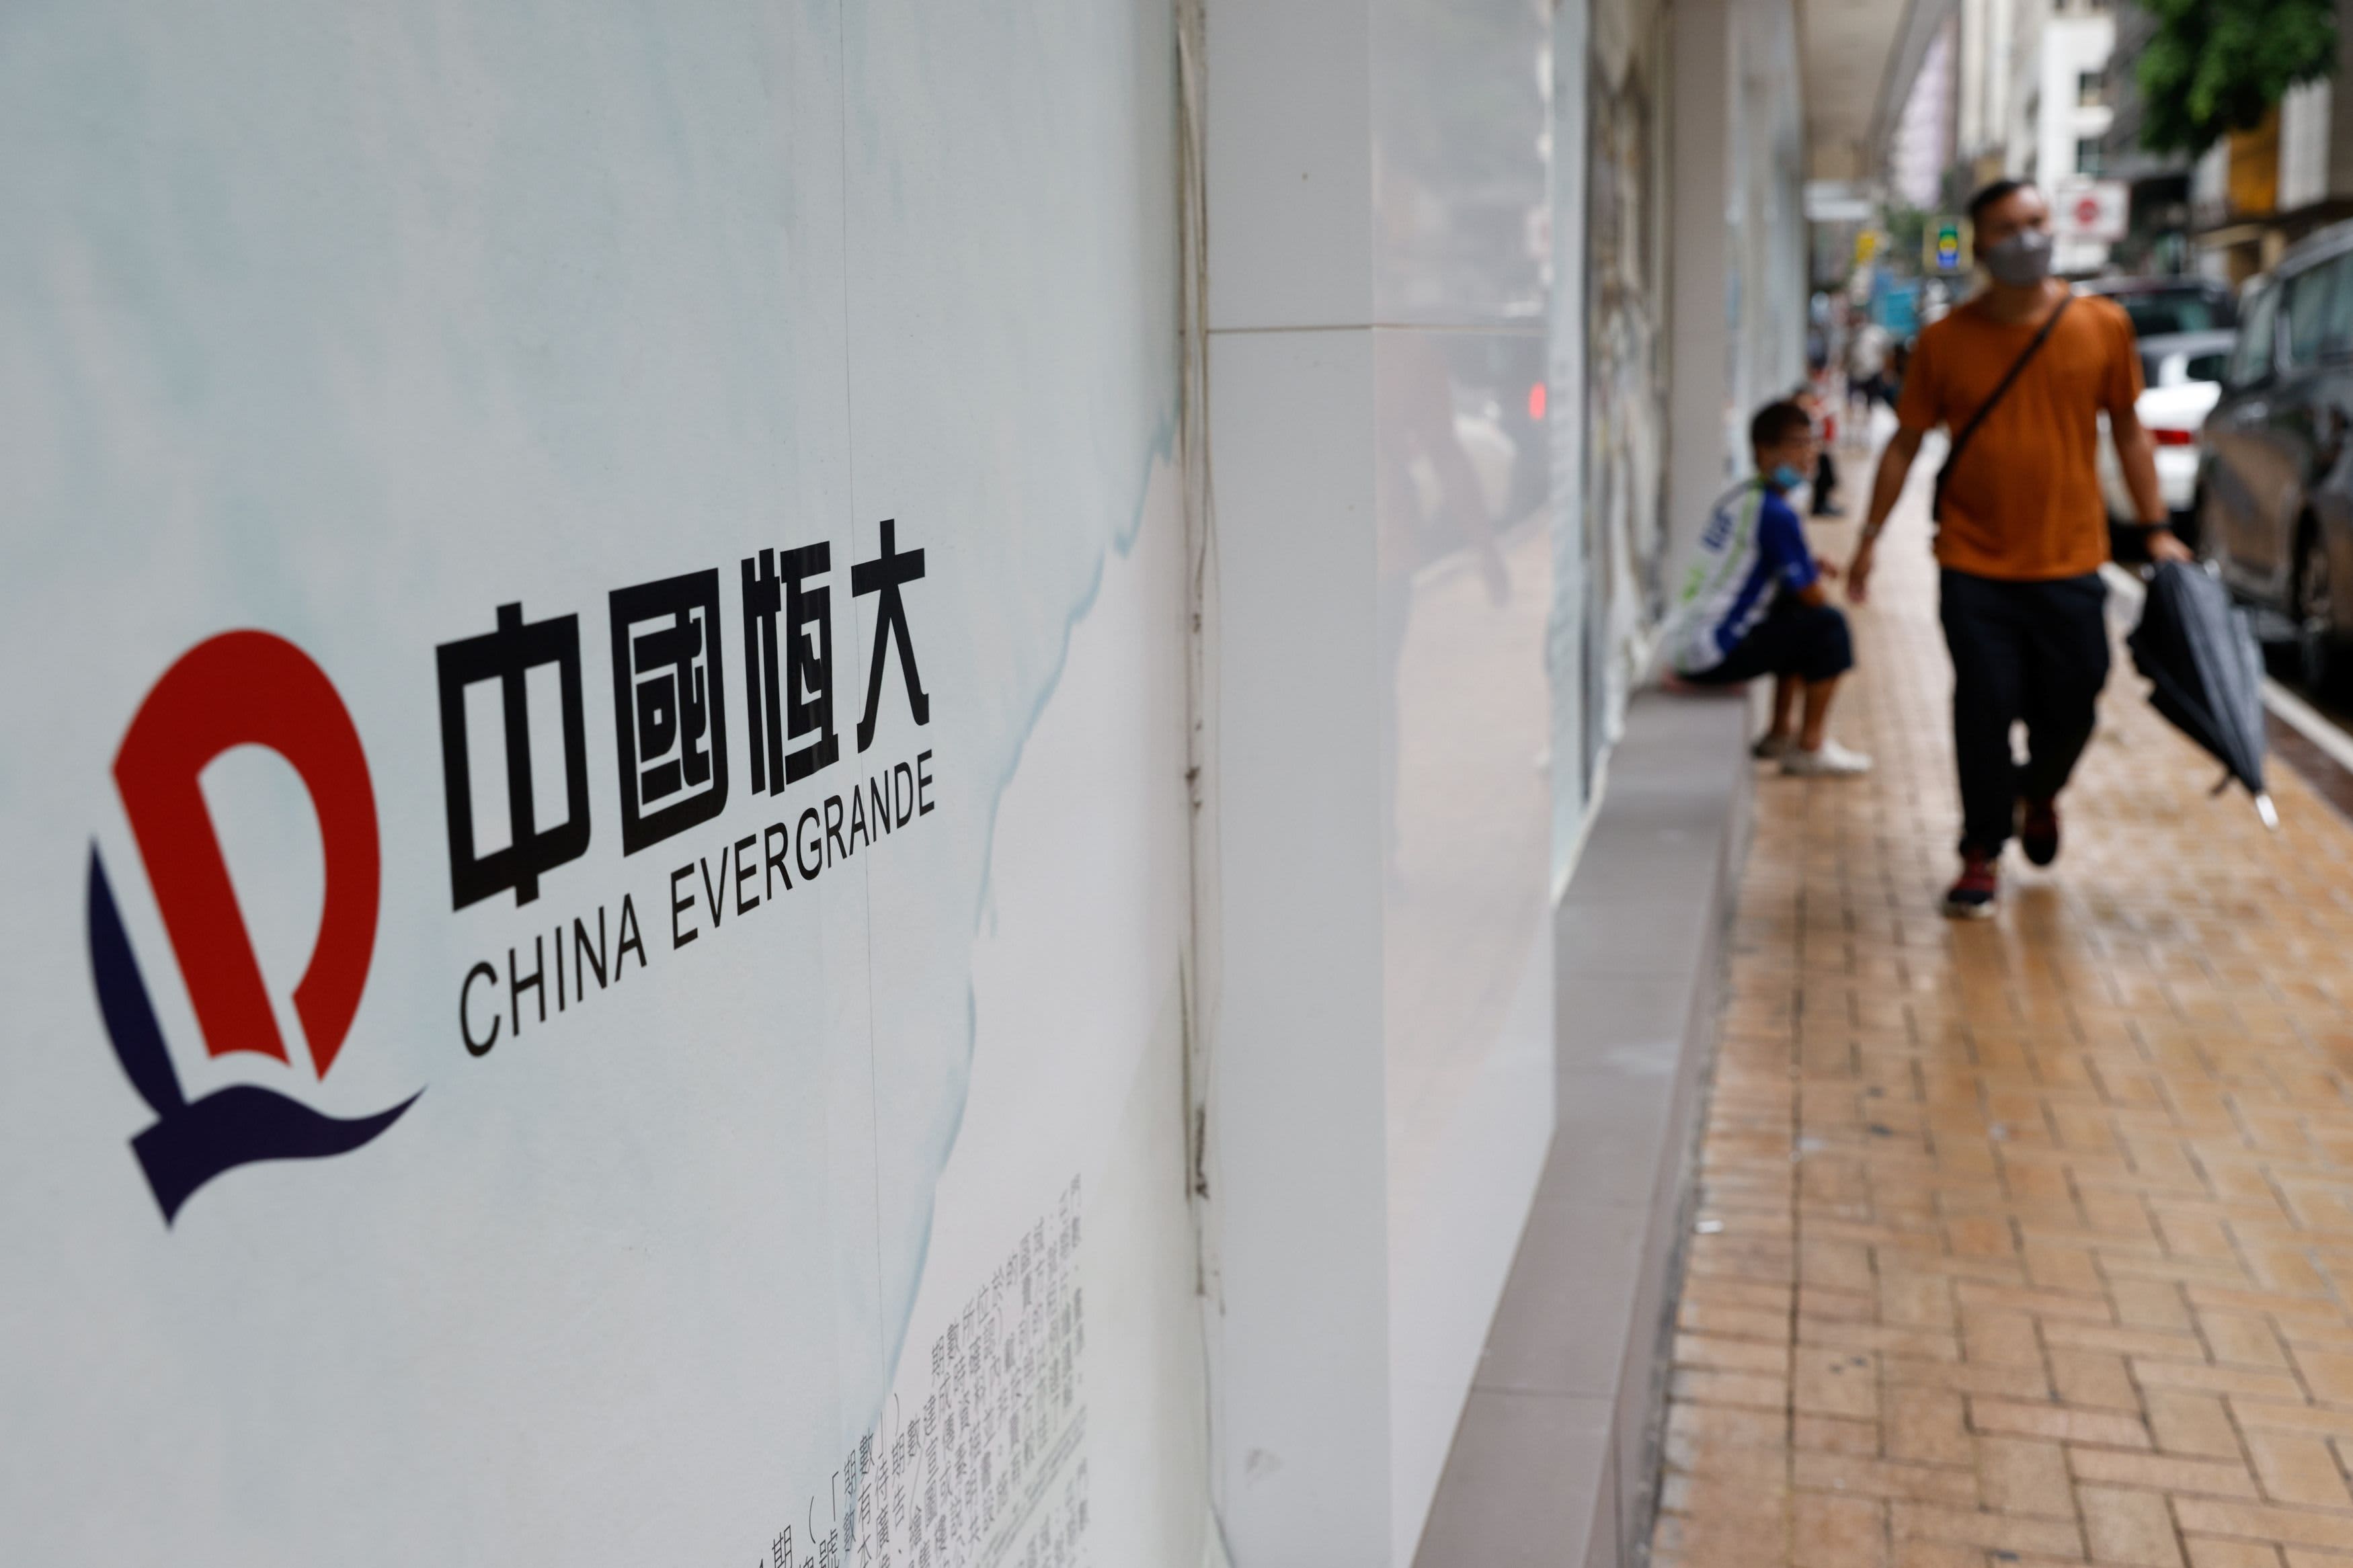 China Evergrande default is highly likely